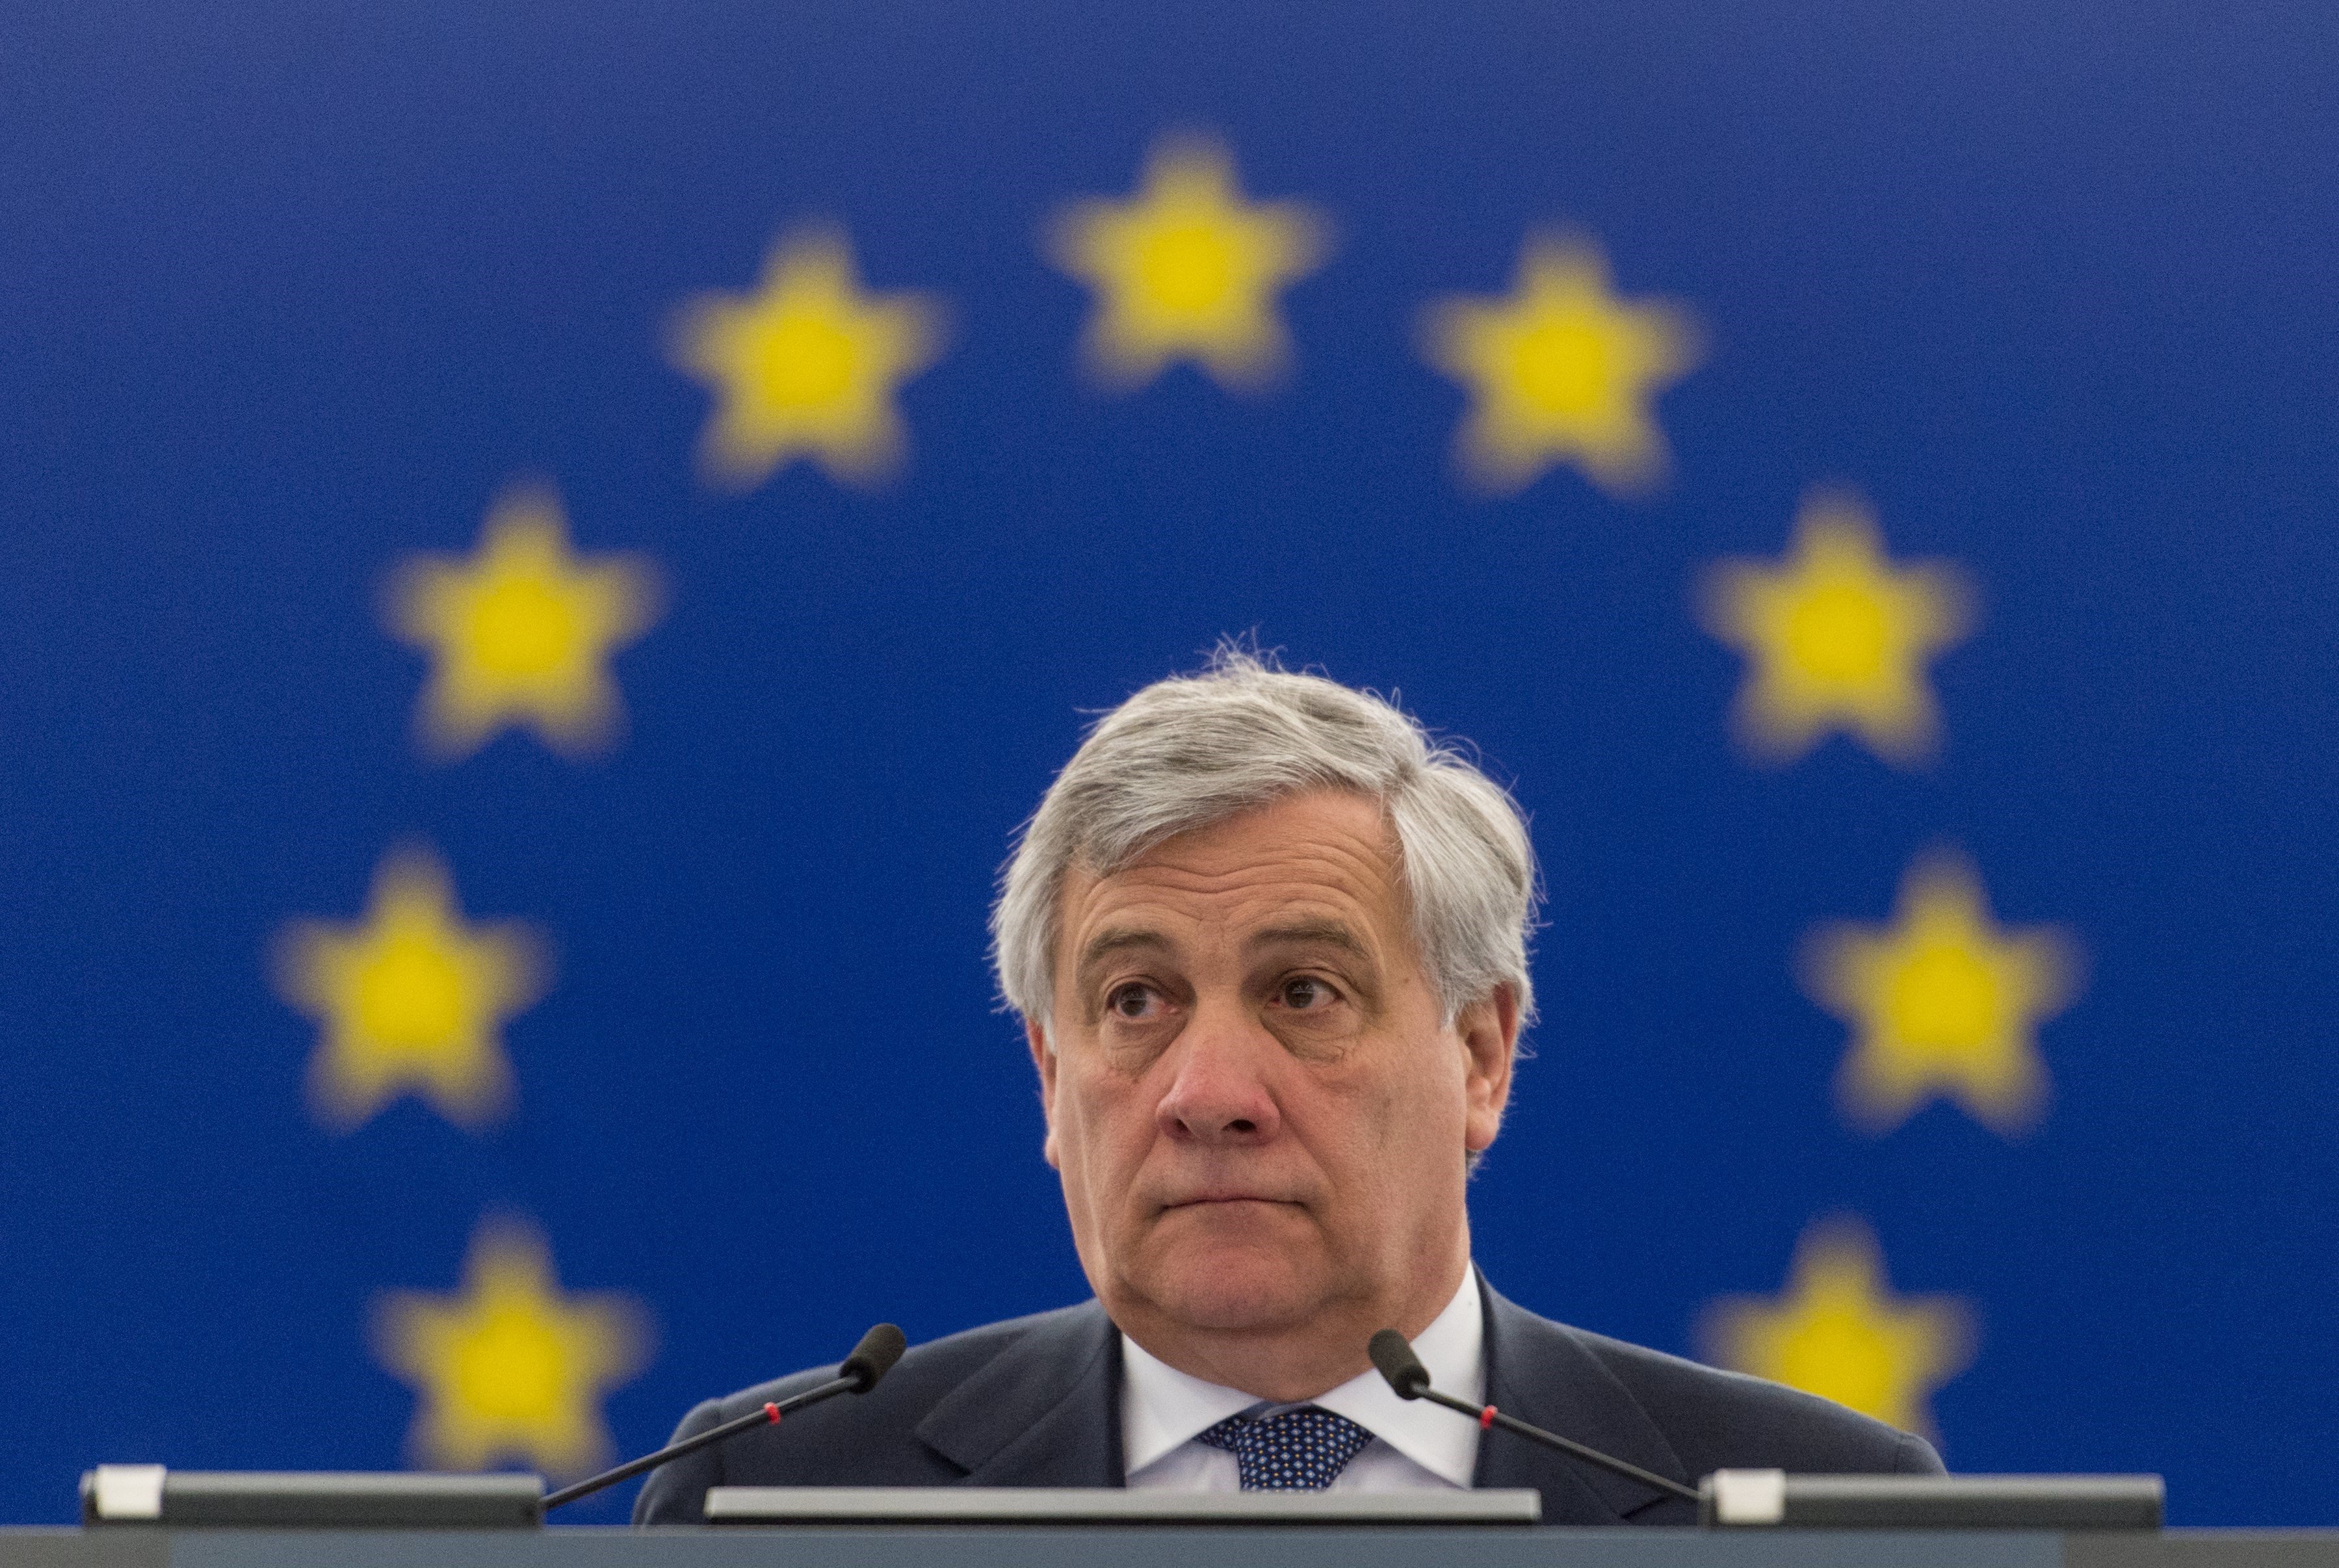 The day that Antonio Tajani revealed his sympathy for a Catalan unionist group